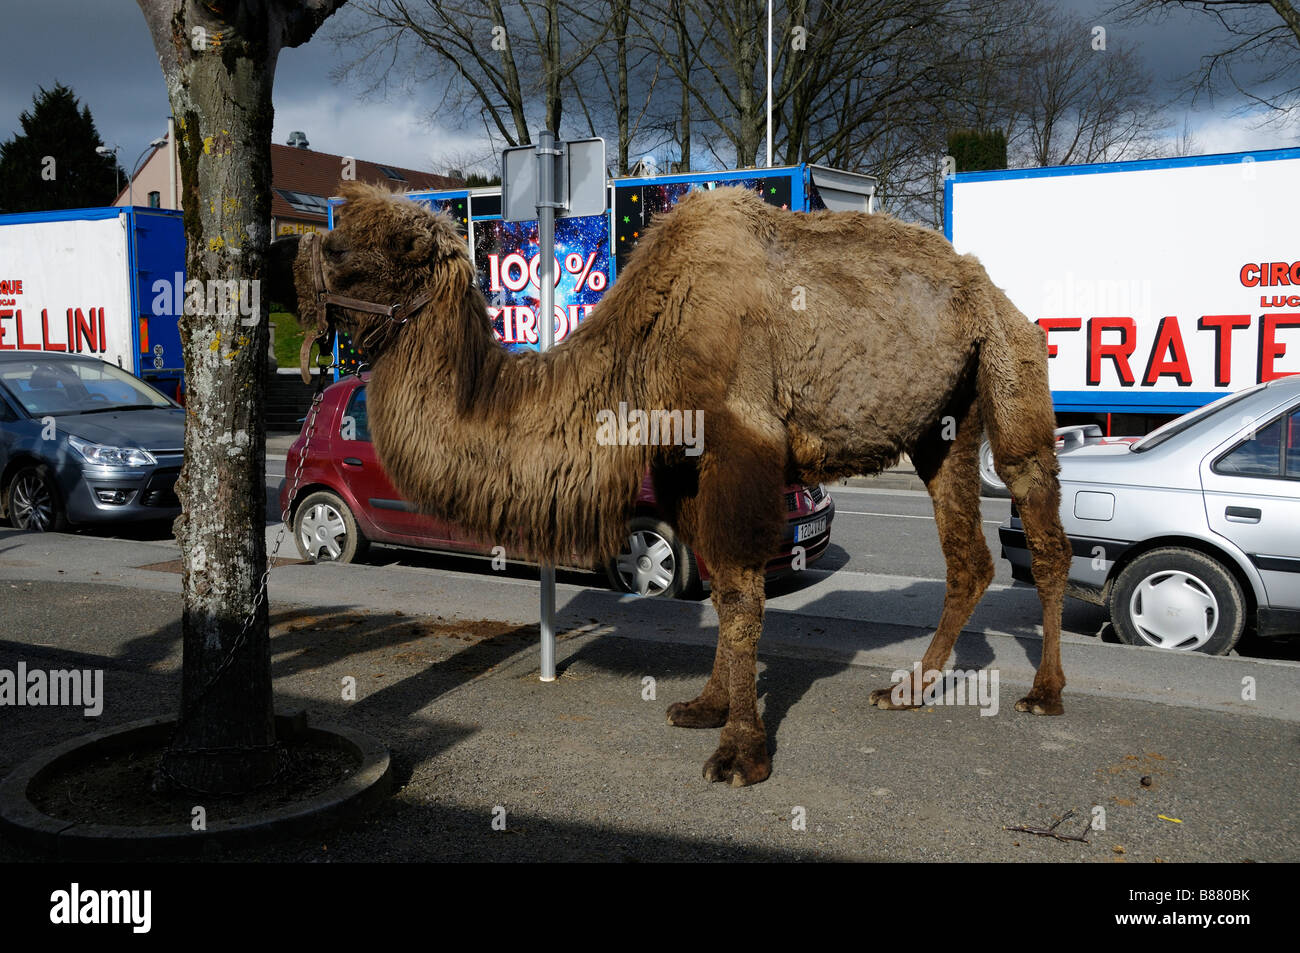 Stock photo of camels chained to a tree outside a circus The Circus was in Bellac France Stock Photo